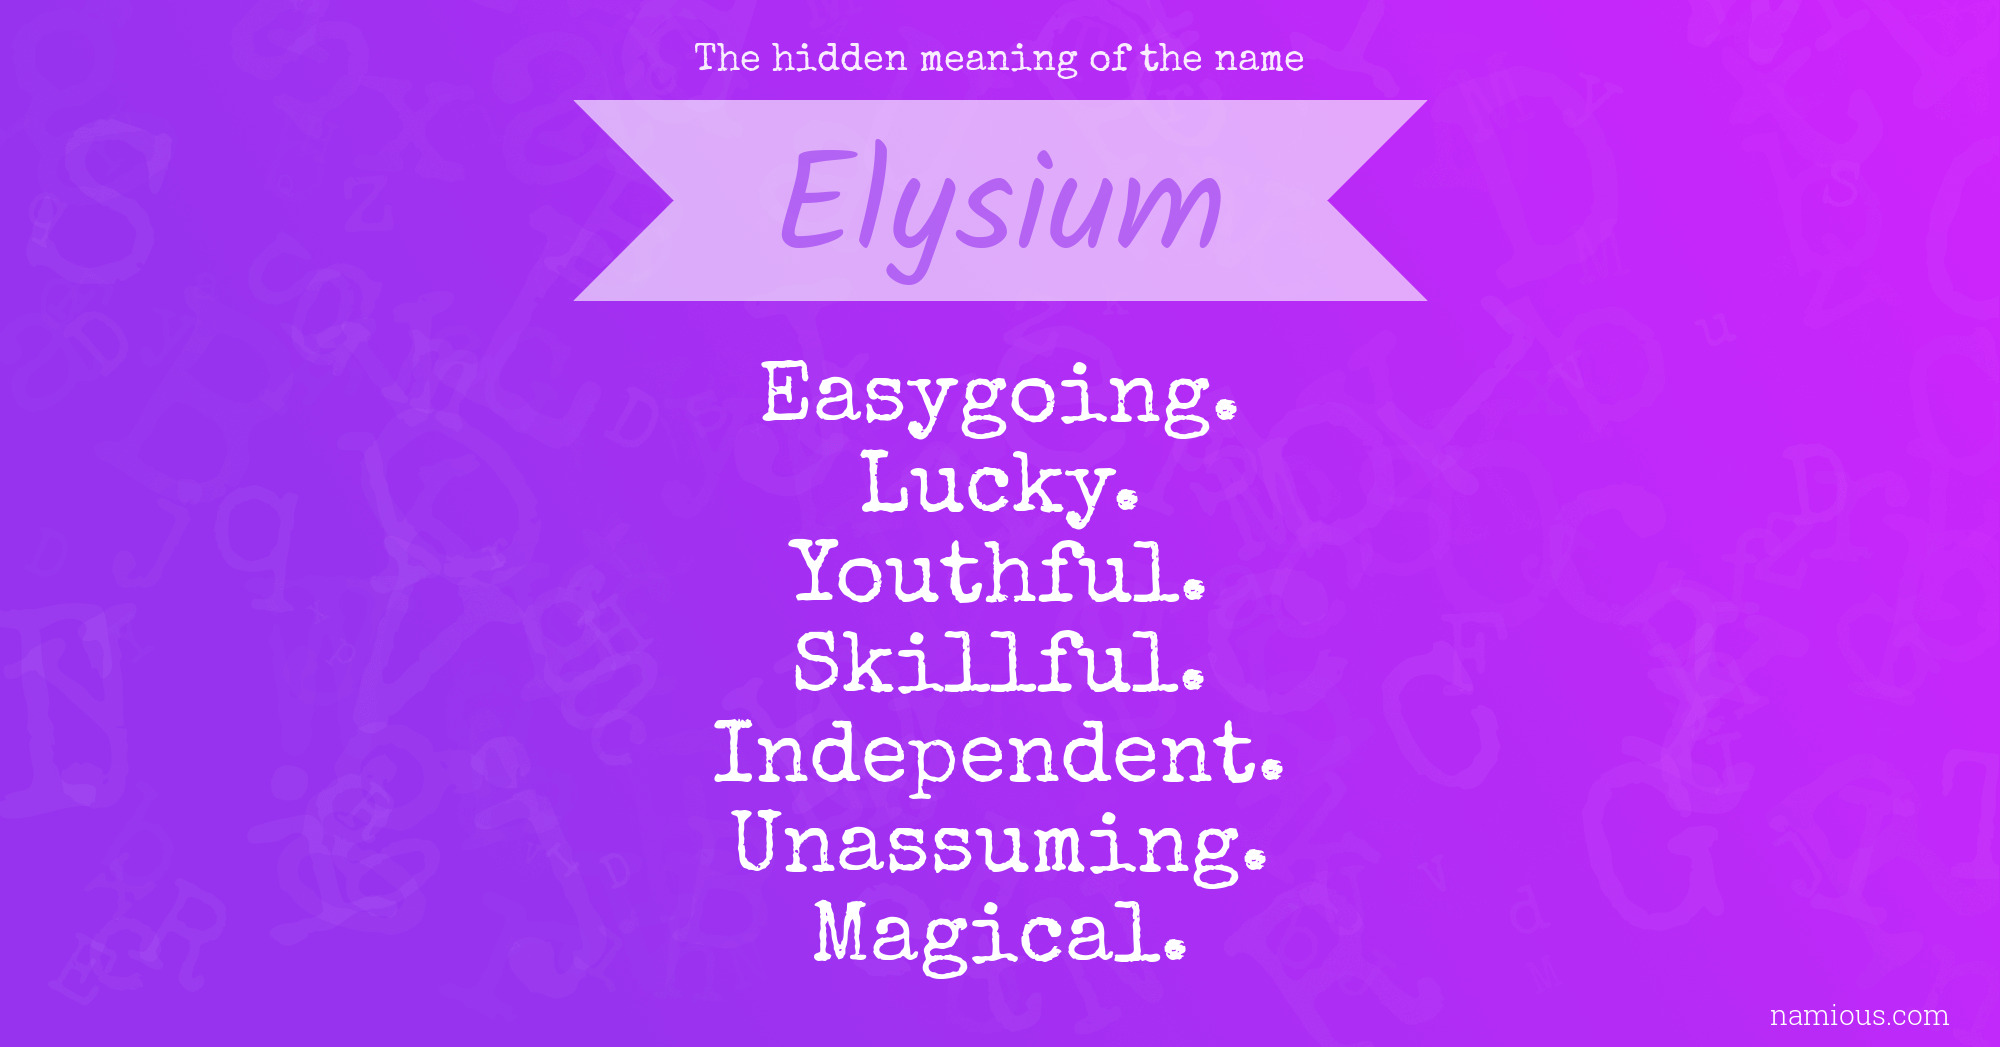 The hidden meaning of the name Elysium